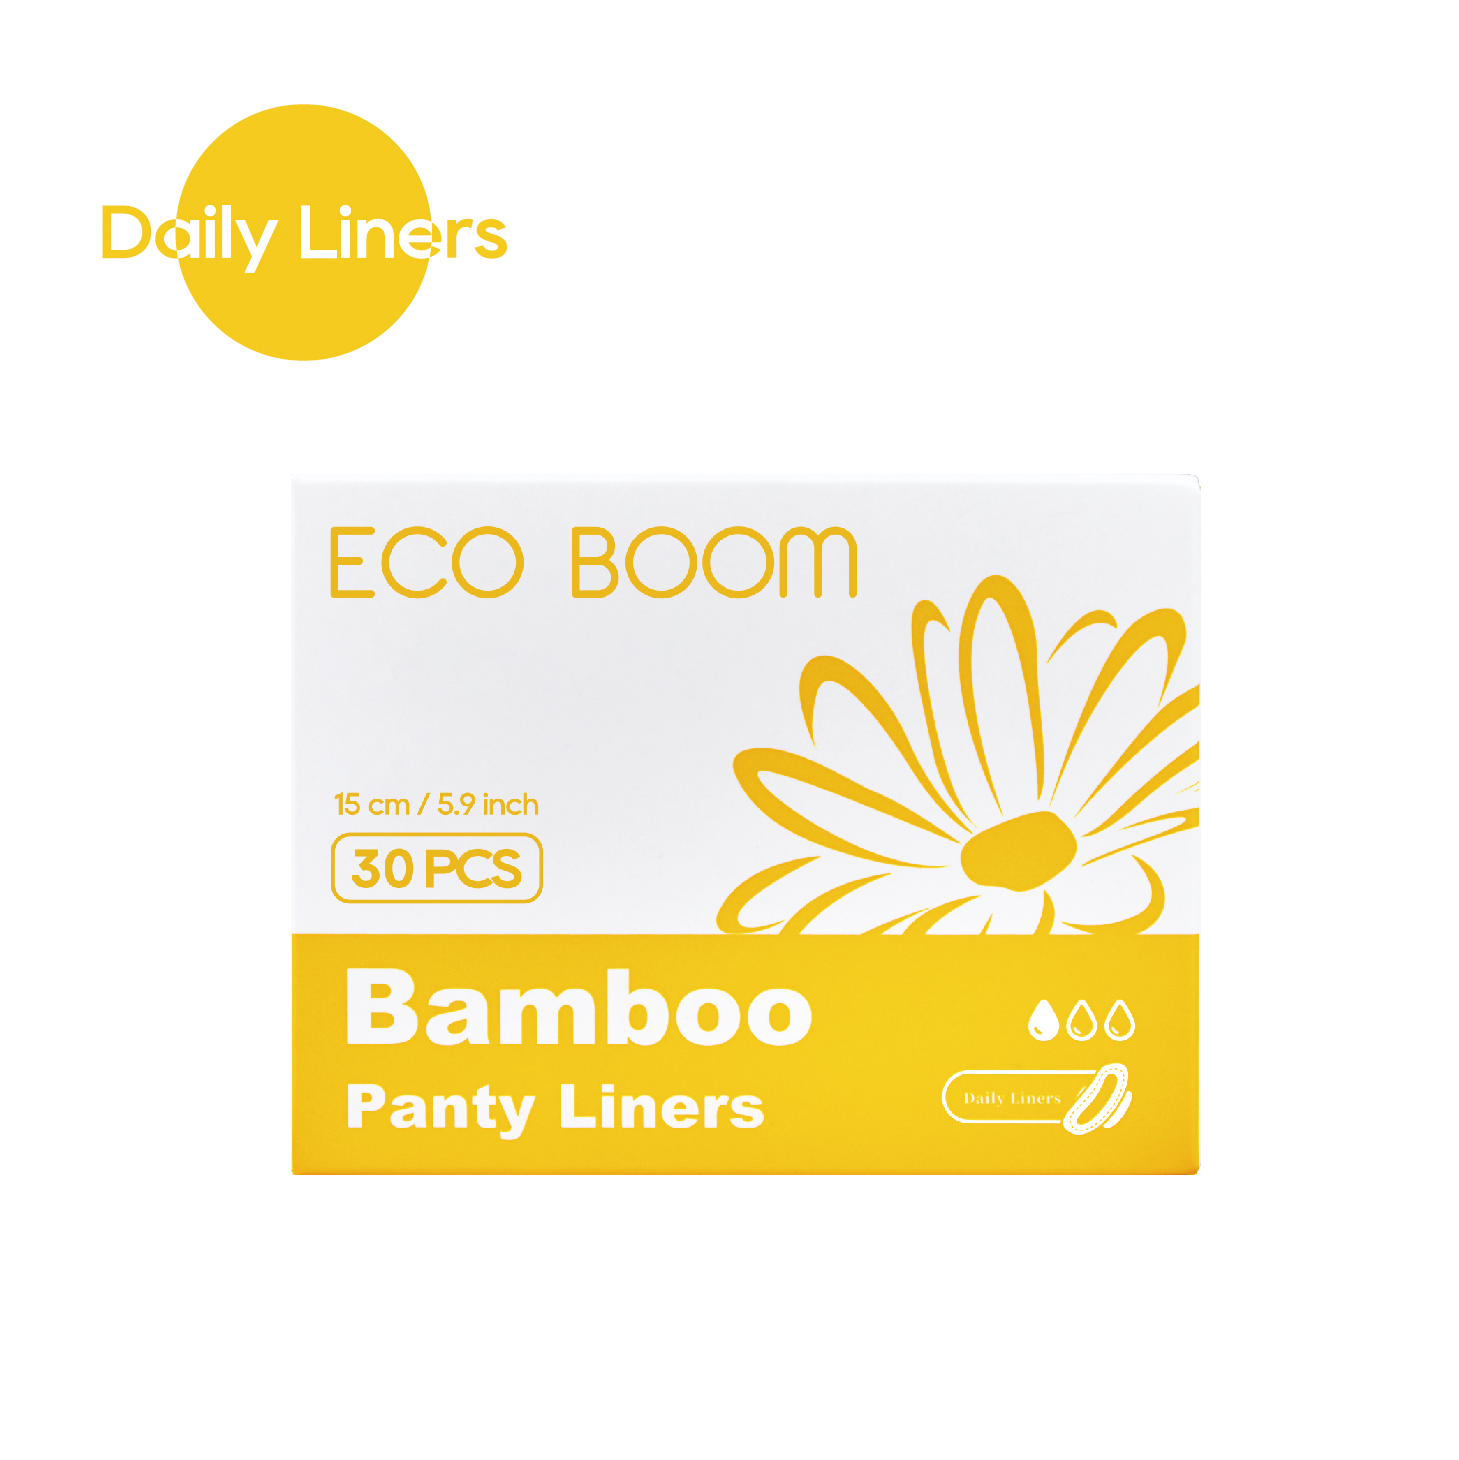 Bamboo-Panty-Liners-Manufacturer